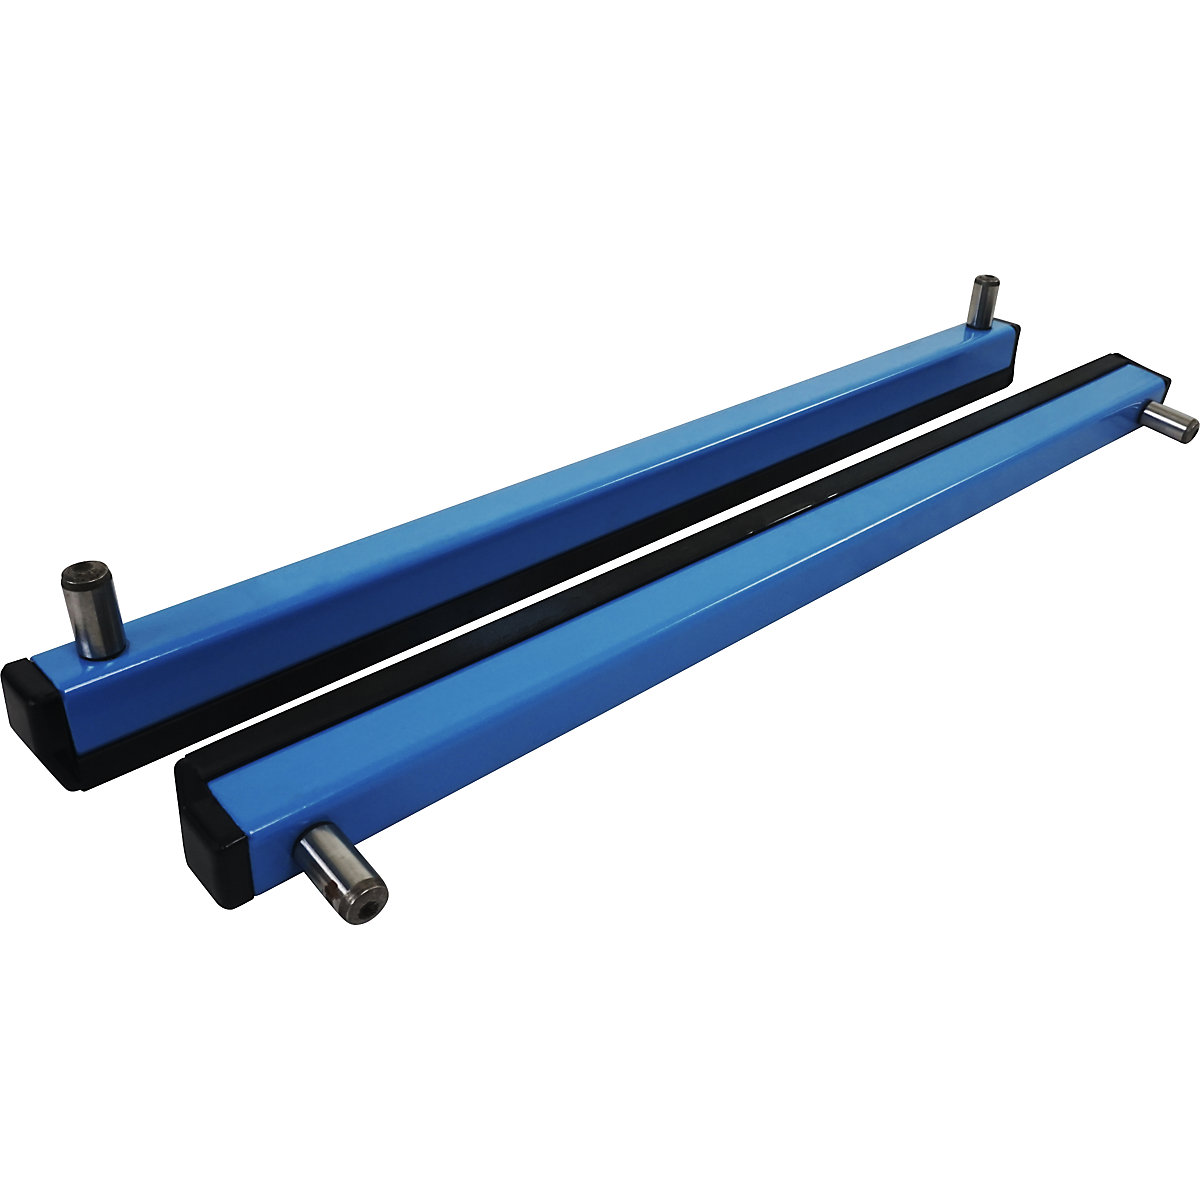 Rubber coated stop rails